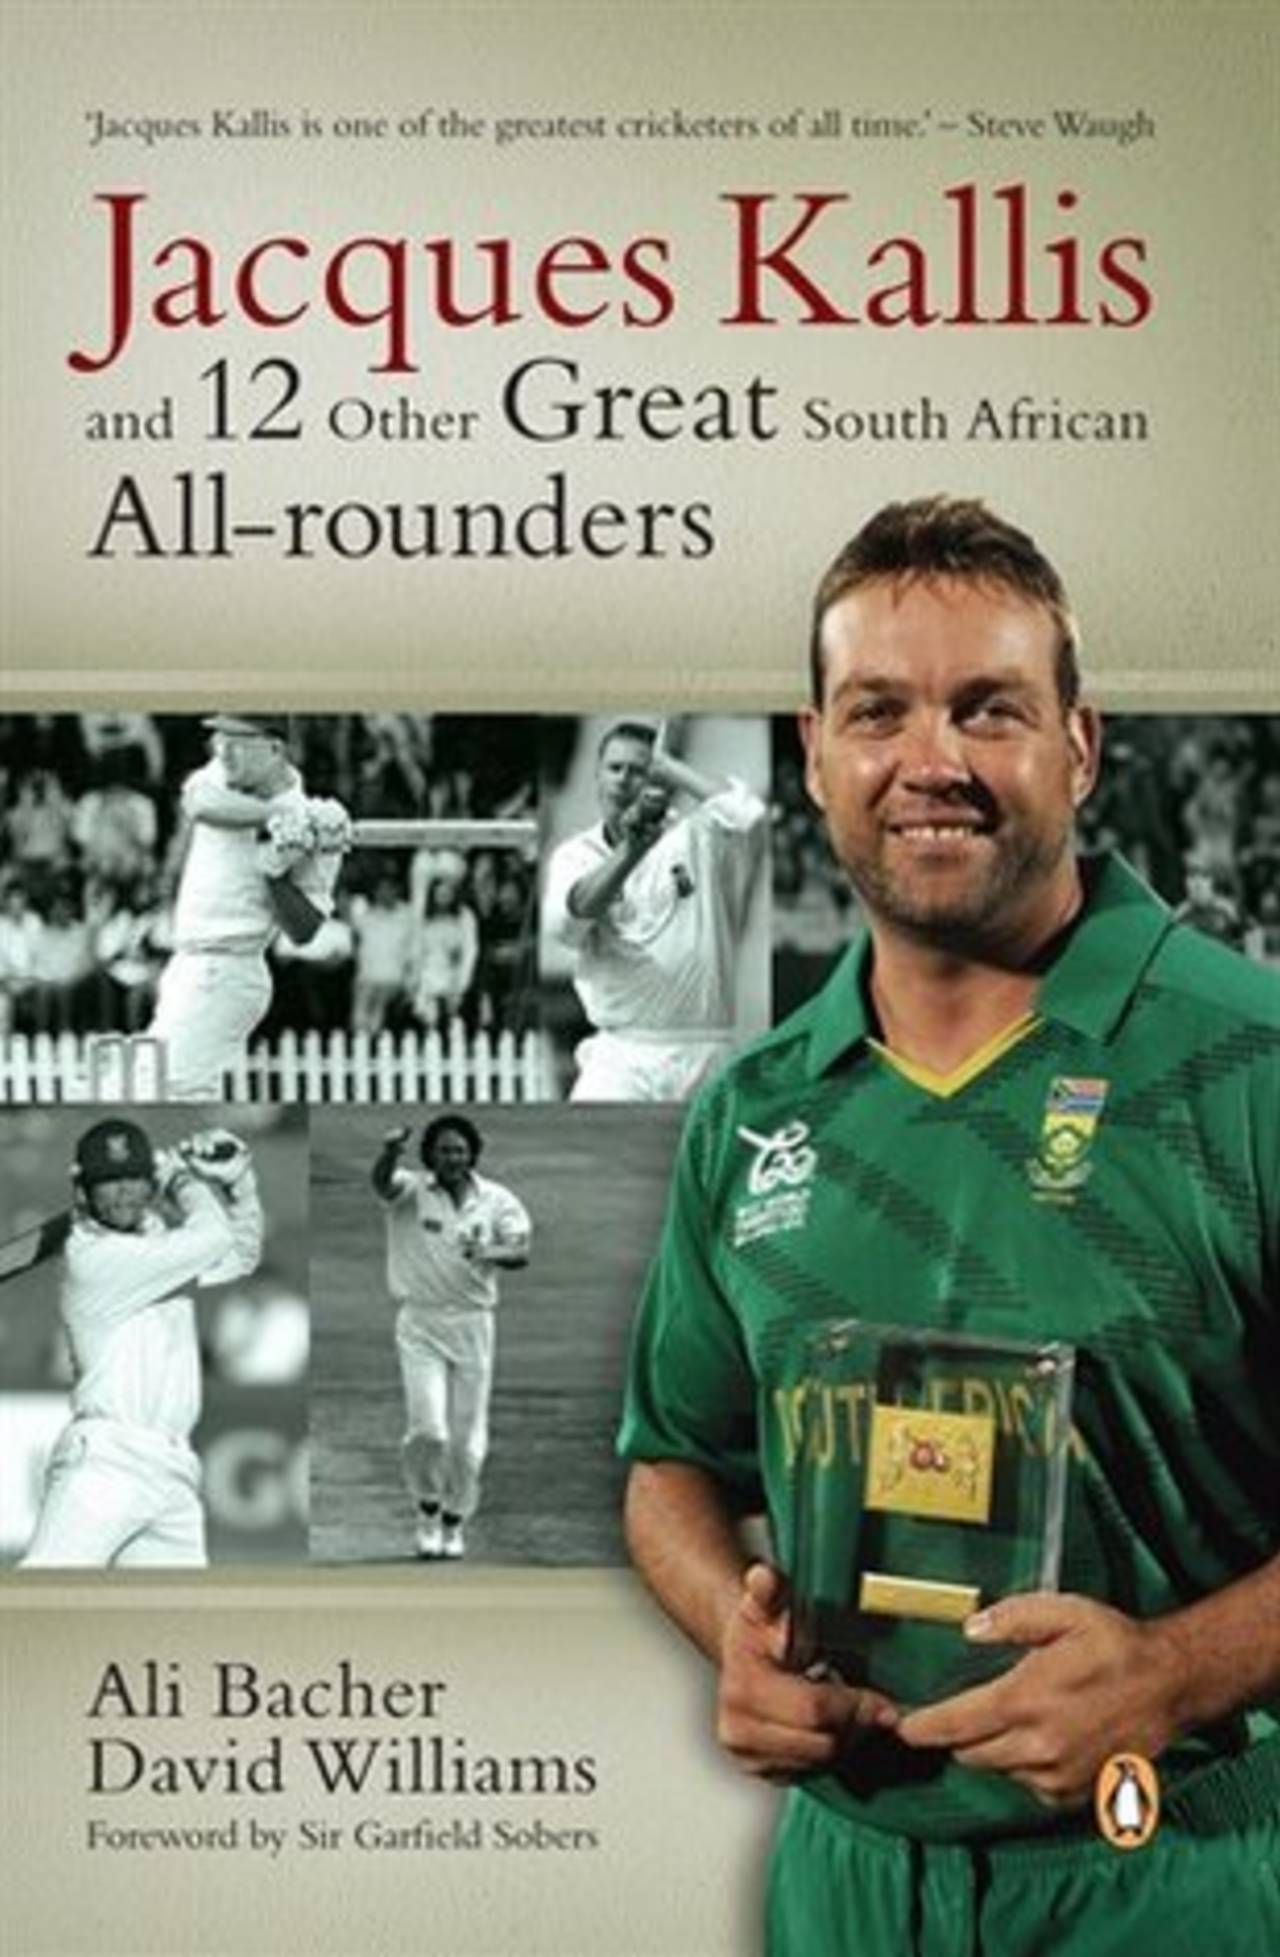 Cover image of <i>Jacques Kallis and 12 other Great South African All-rounders </i>